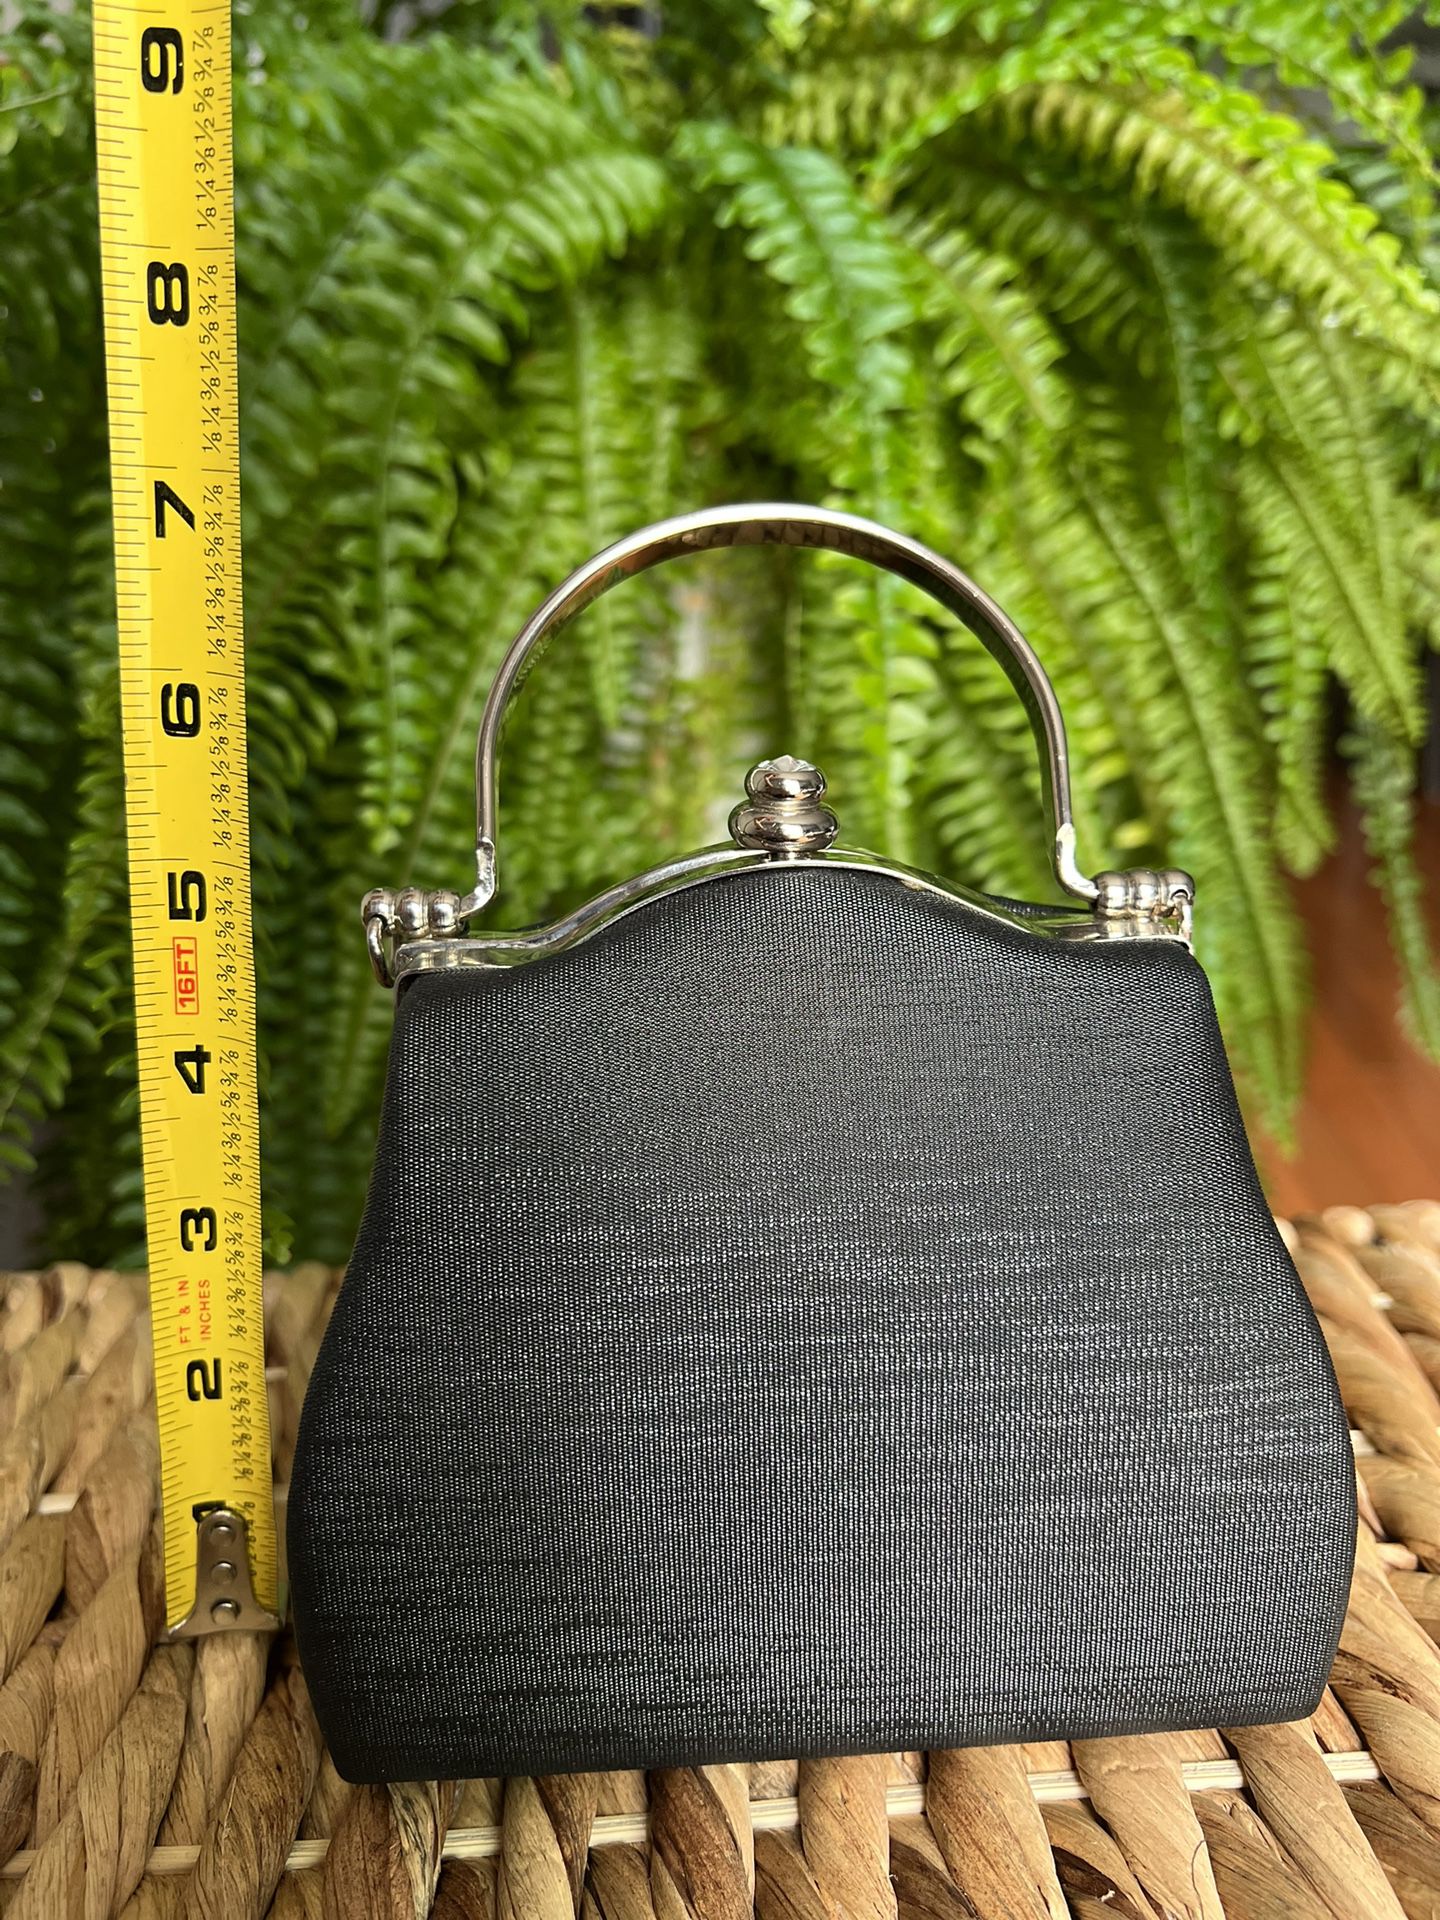 Evening Bag - Black Satin with top handle and detachable chain strap